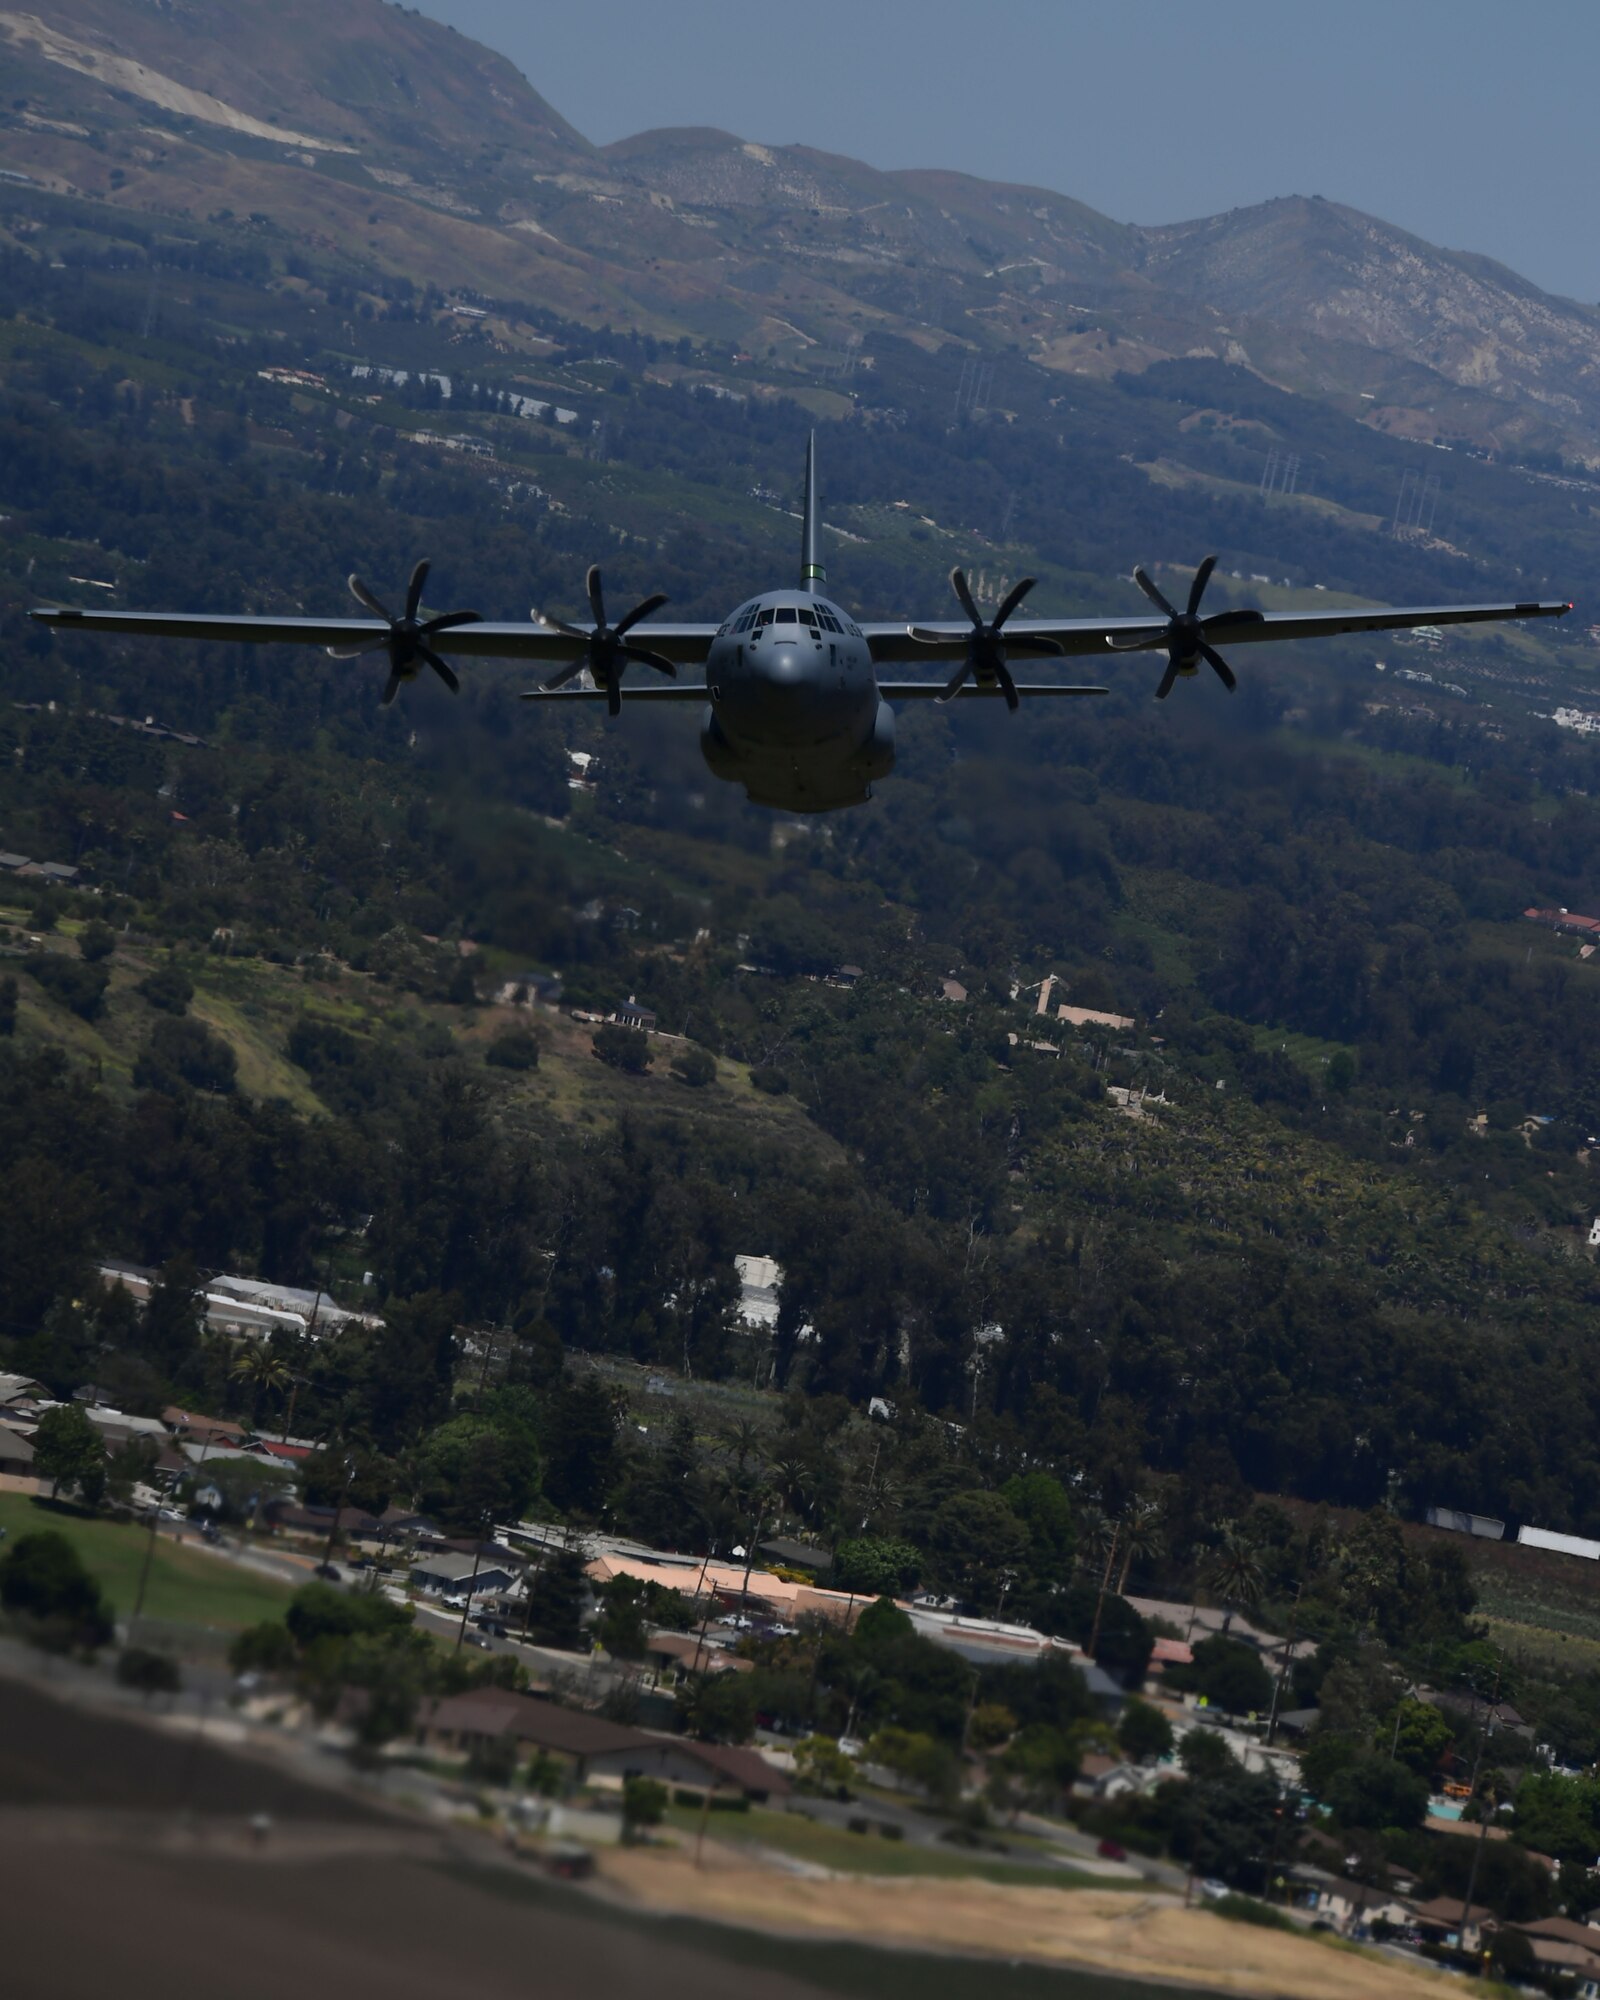 A military California Air National Guard C-130J Super Hercules aircraft is shown flying at a low altitude over the Camarillo Valley.